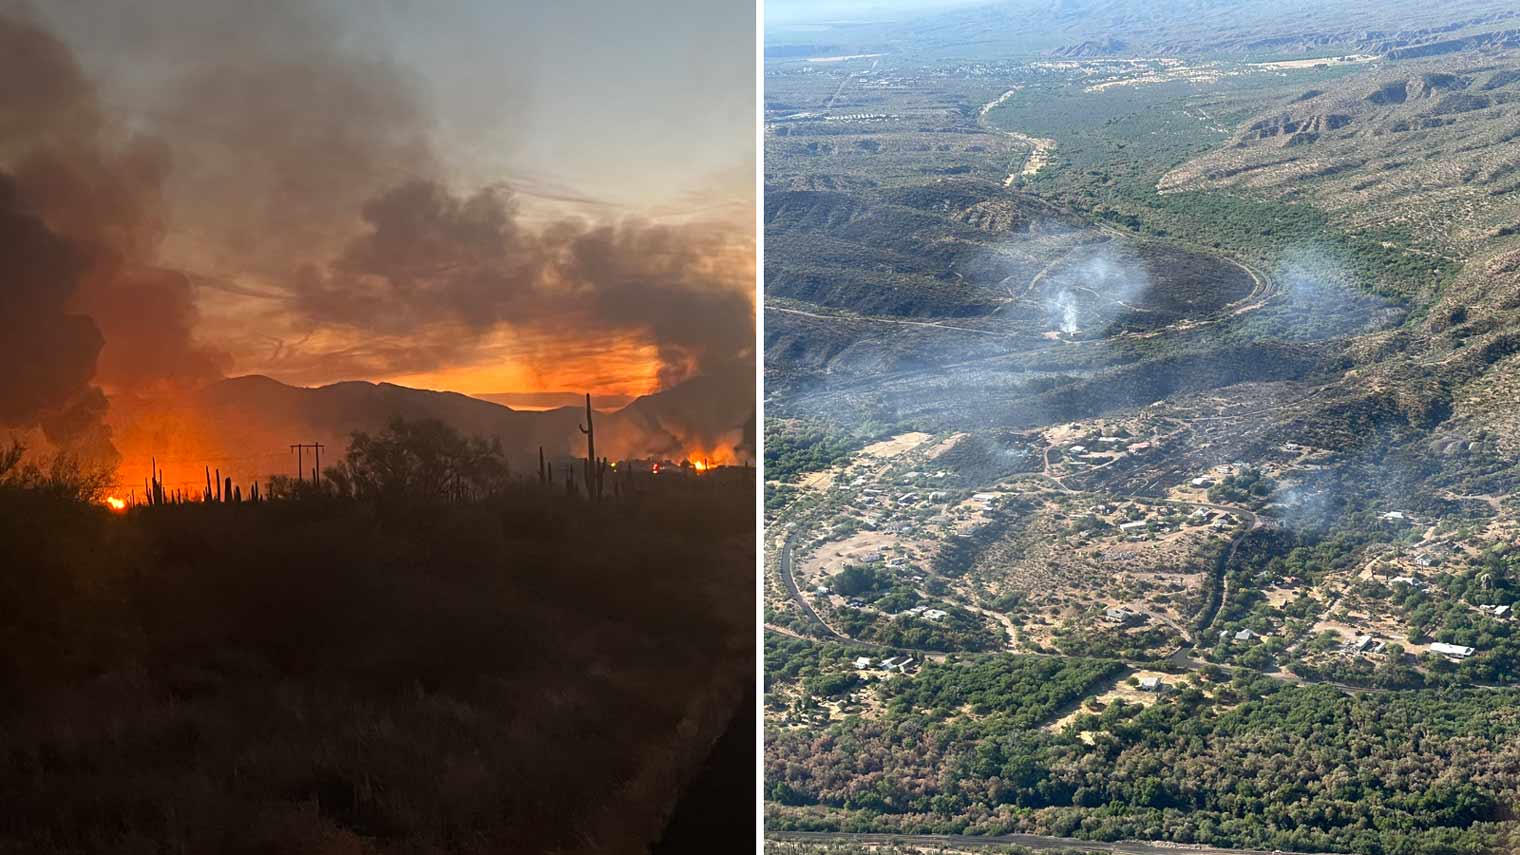 Simmons Fire evacuation orders lifted in Arizona after 3 days